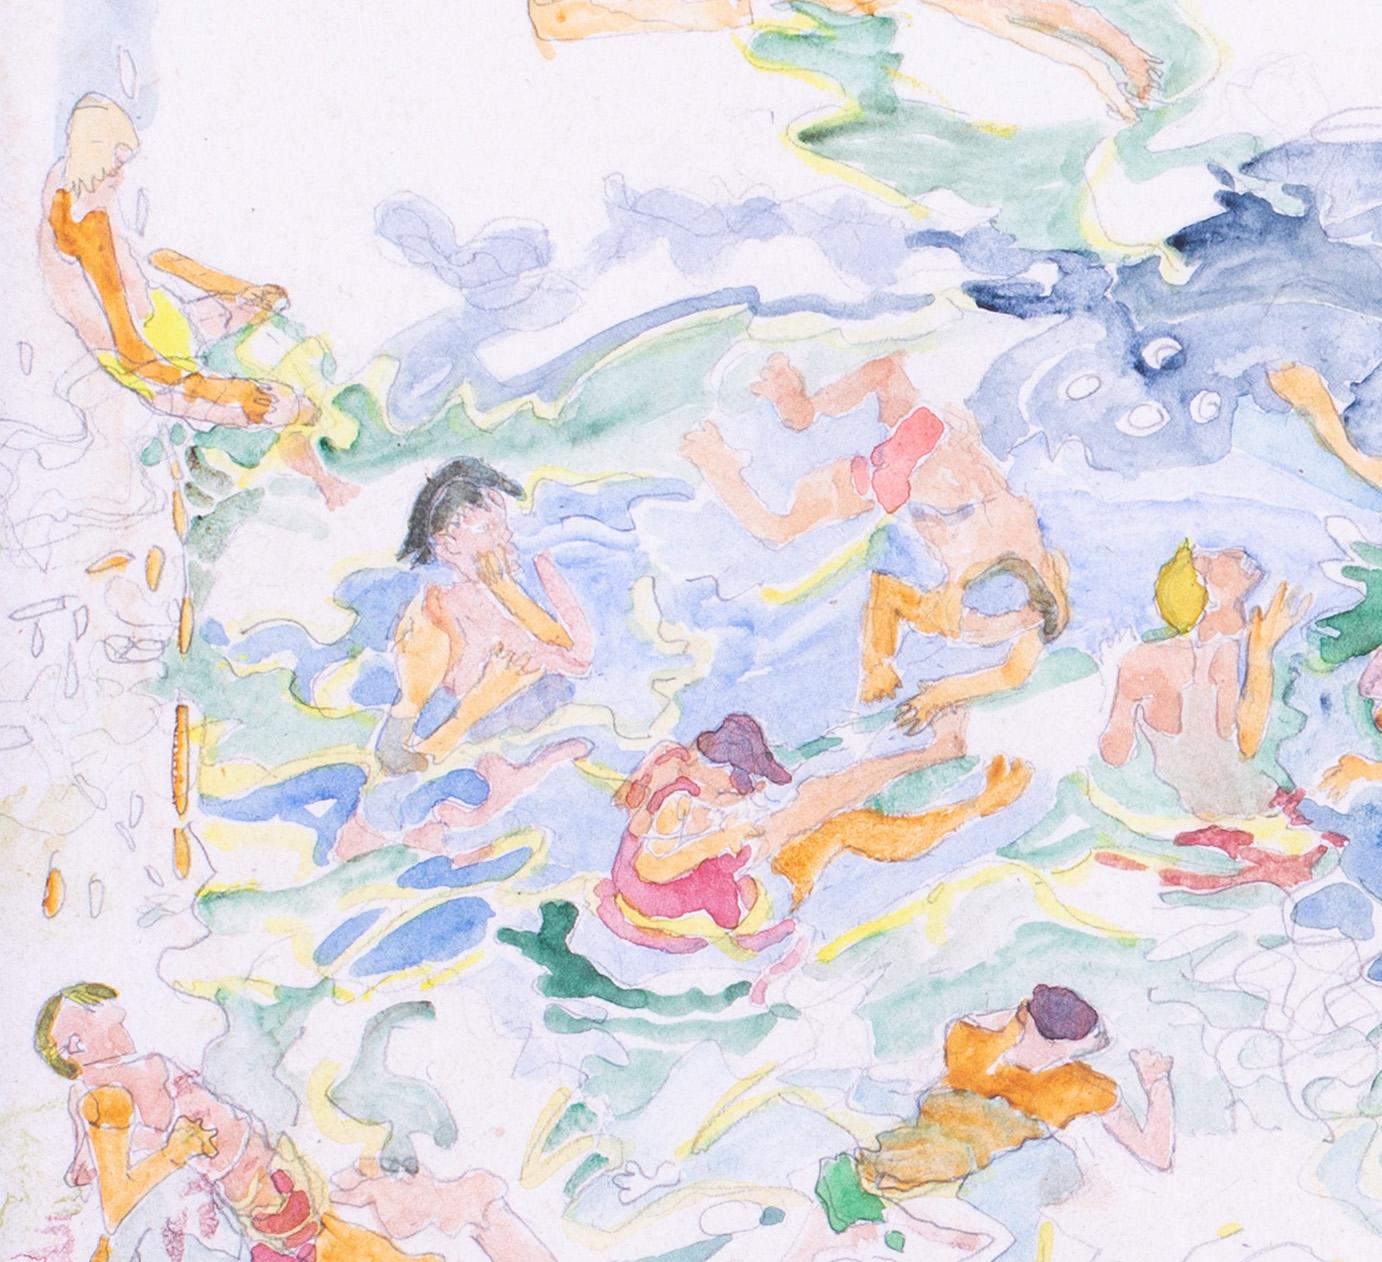 British 20th Century watercolour drawing of figures having fun at the lido - Gray Figurative Art by Steven Spurrier RA